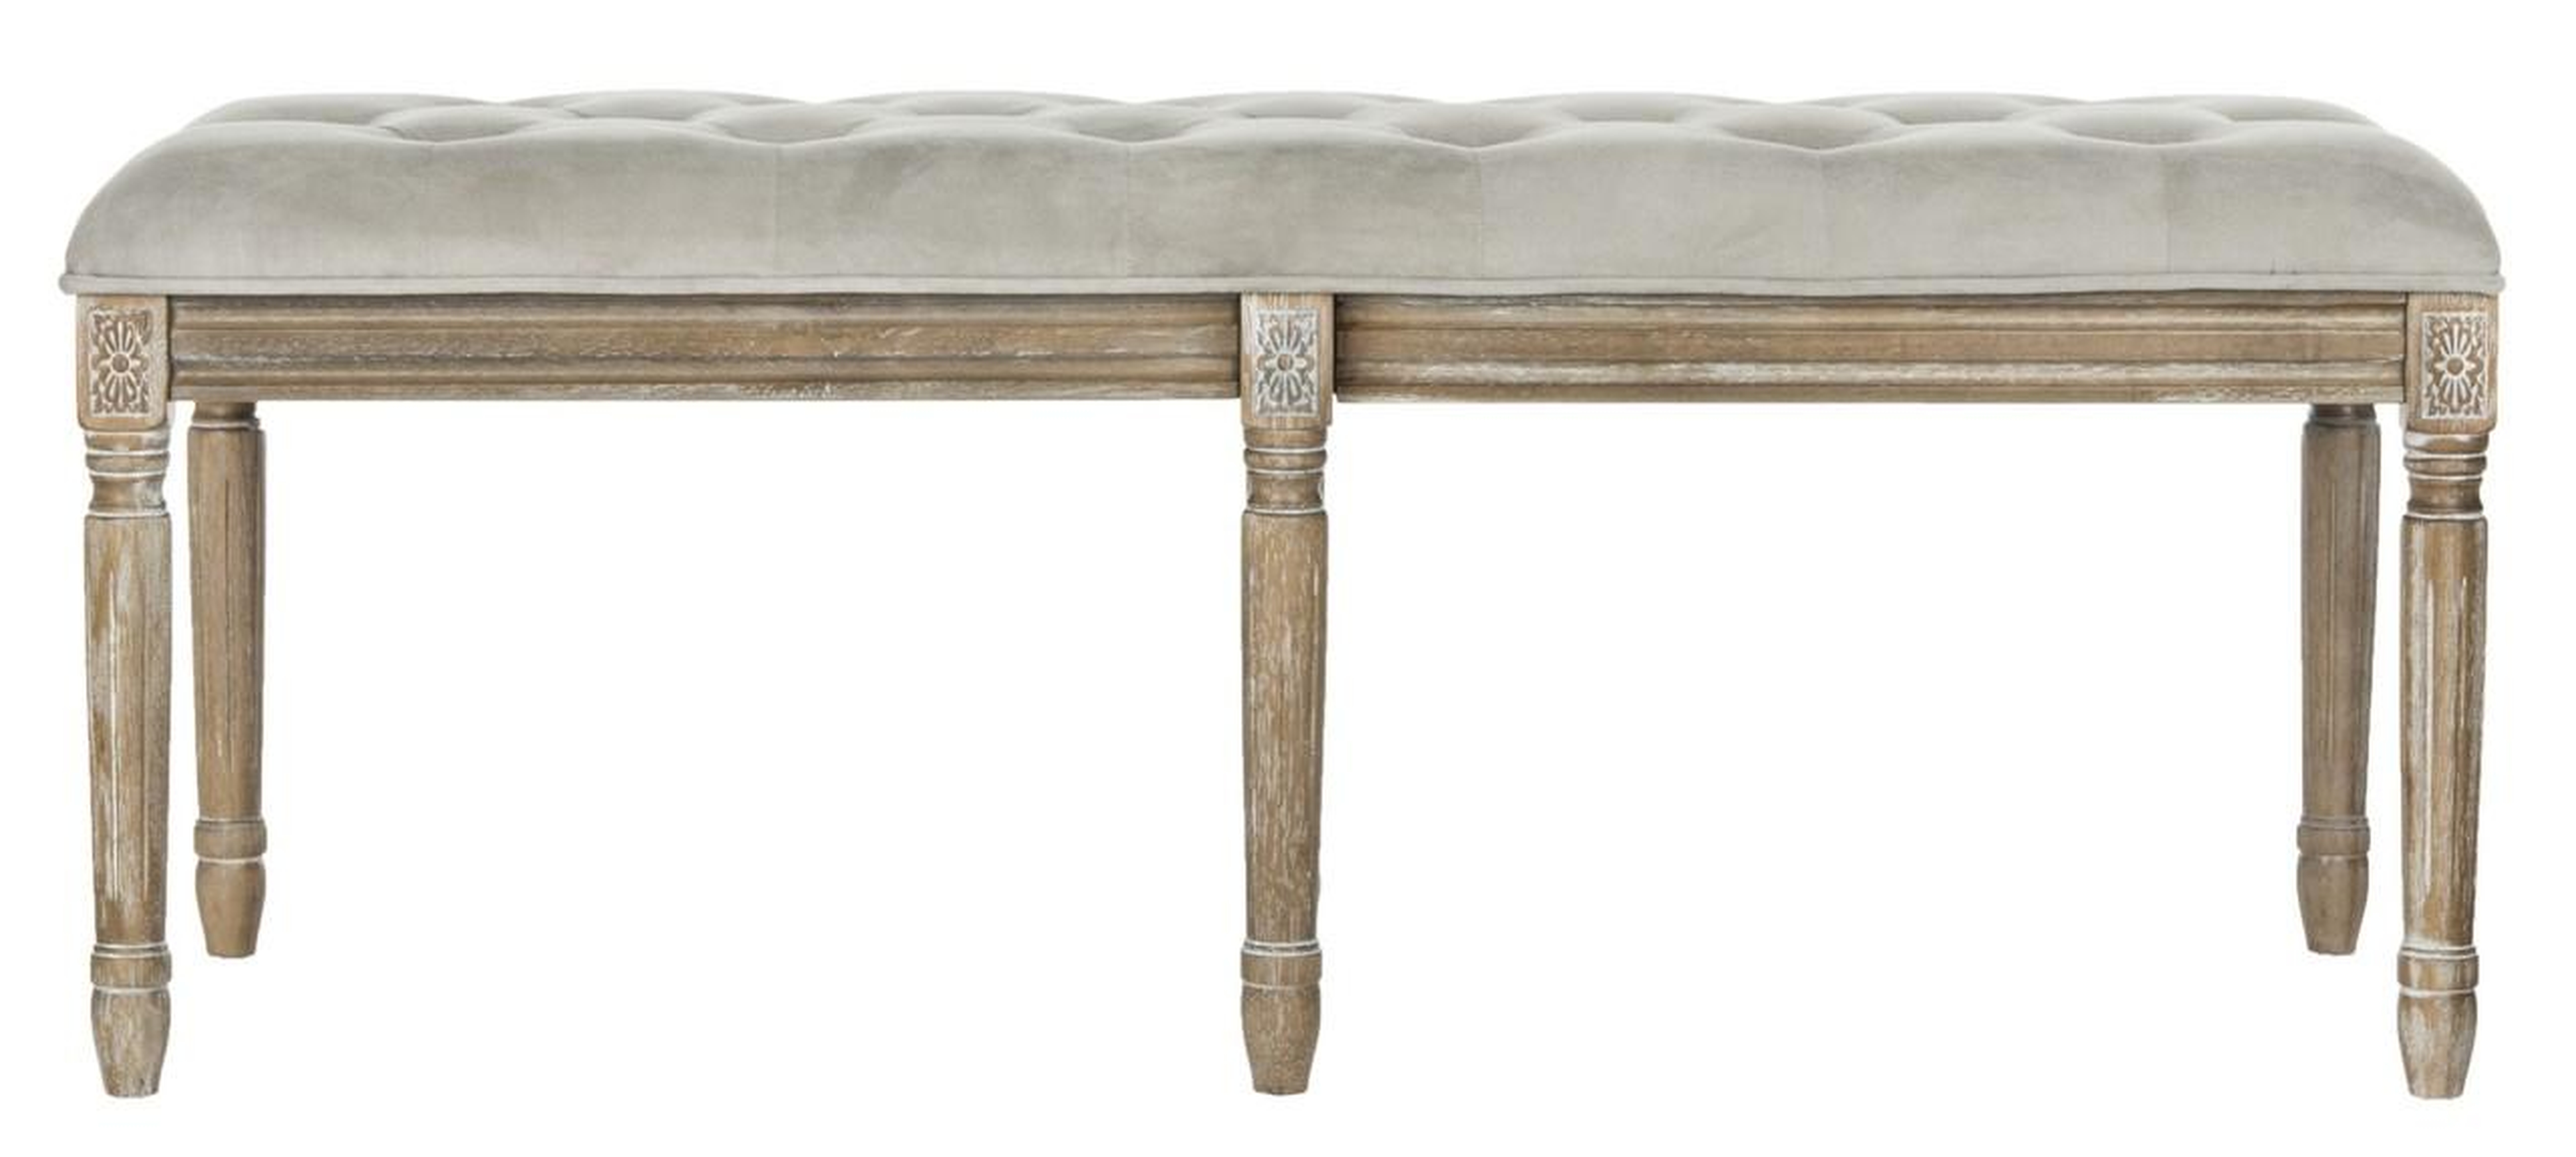 ROCHA 19''H FRENCH BRASSERIE TUFTED TRADITIONAL RUSTIC WOOD BENCH - Arlo Home